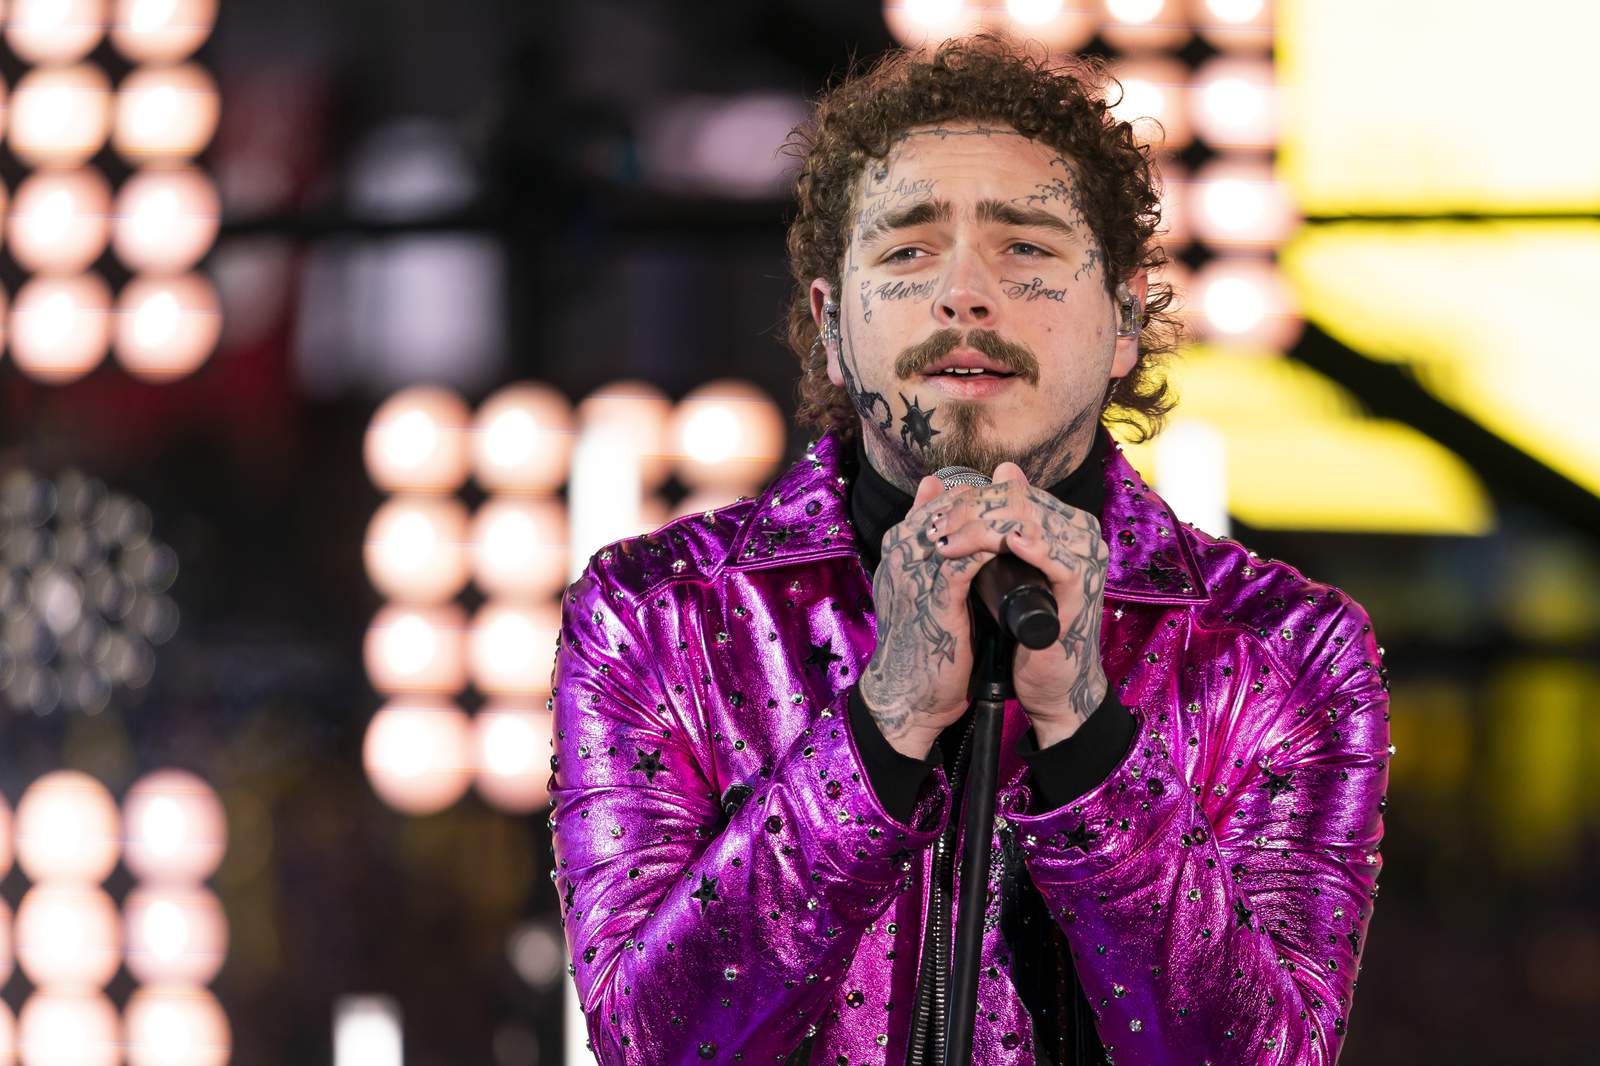 Sweet 16: Post Malone leads Billboard Awards nominations